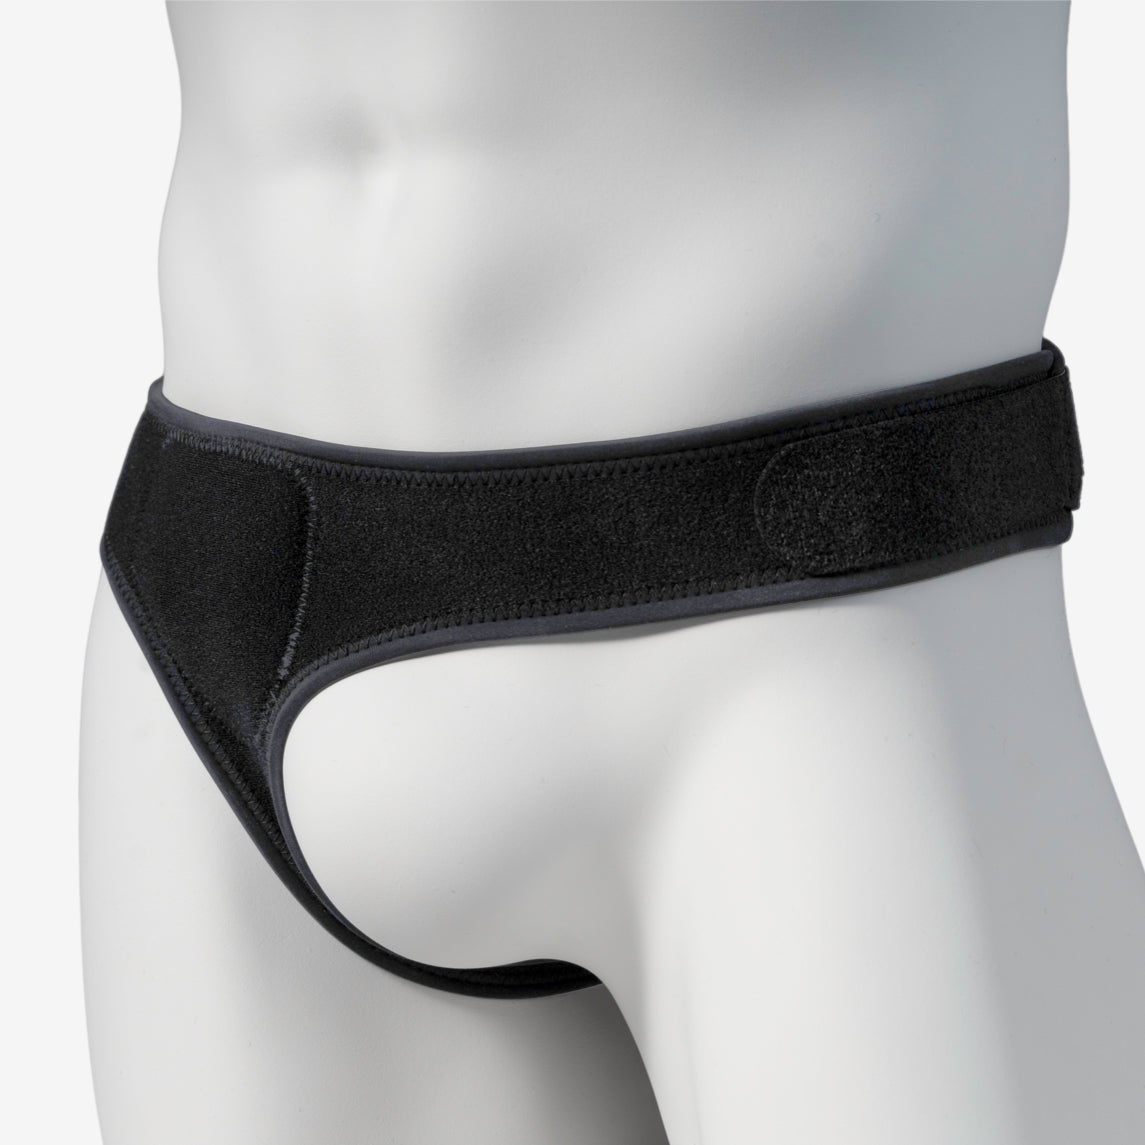 Hernia Belt Truss For Single/double Inguinal Or Sports Hernia